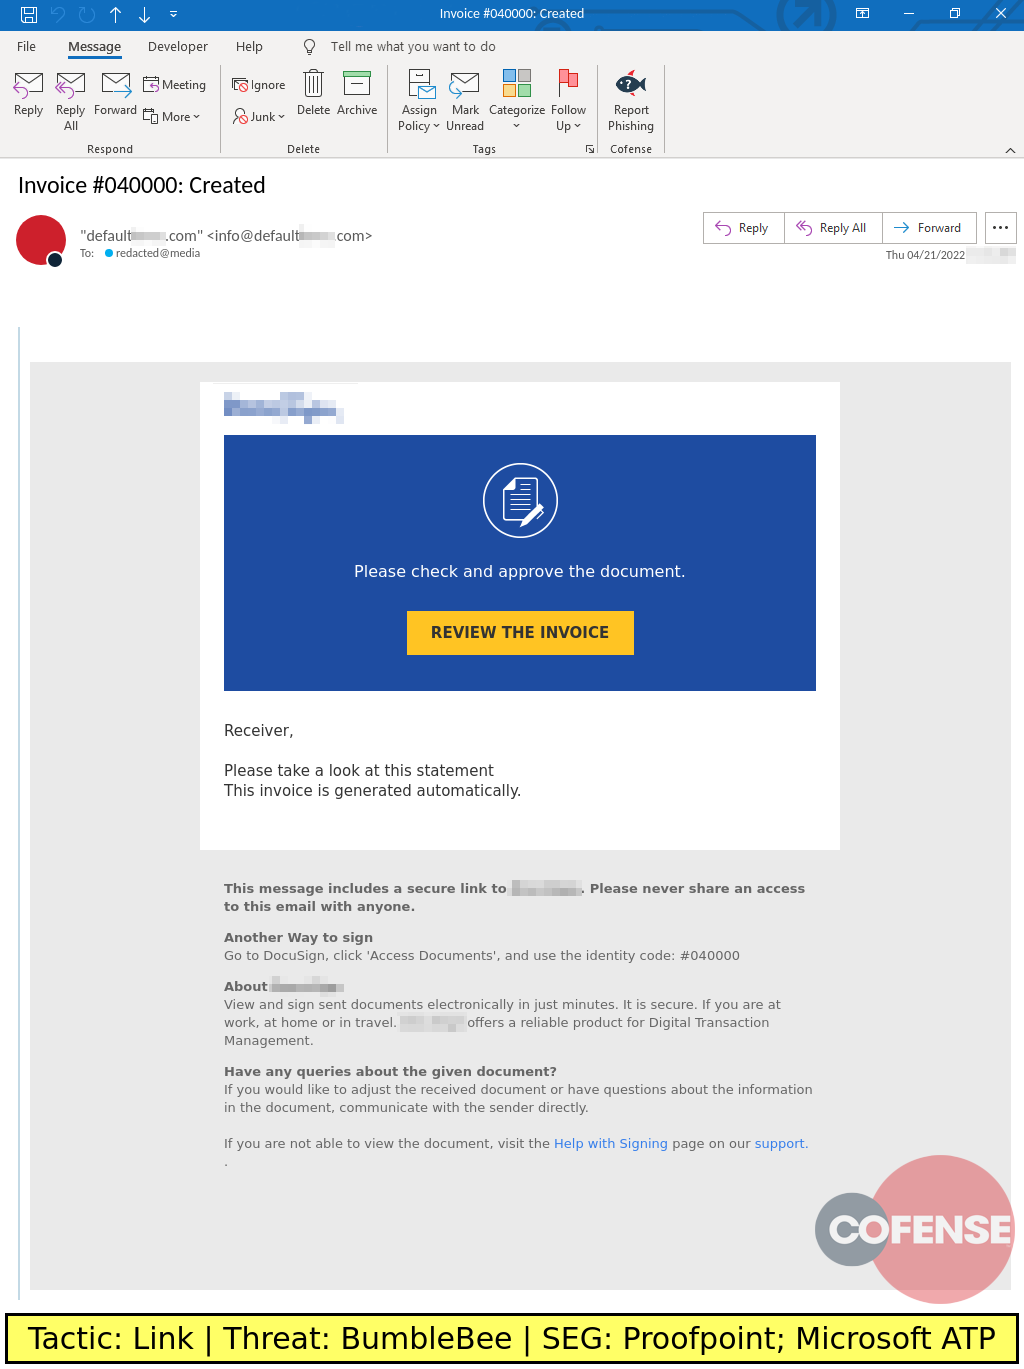 Real Phishing Example: Docusign-spoofing campaign found in environments protected by Proofpoint and Microsoft ATP delivers BumbleBee via an embedded URL.